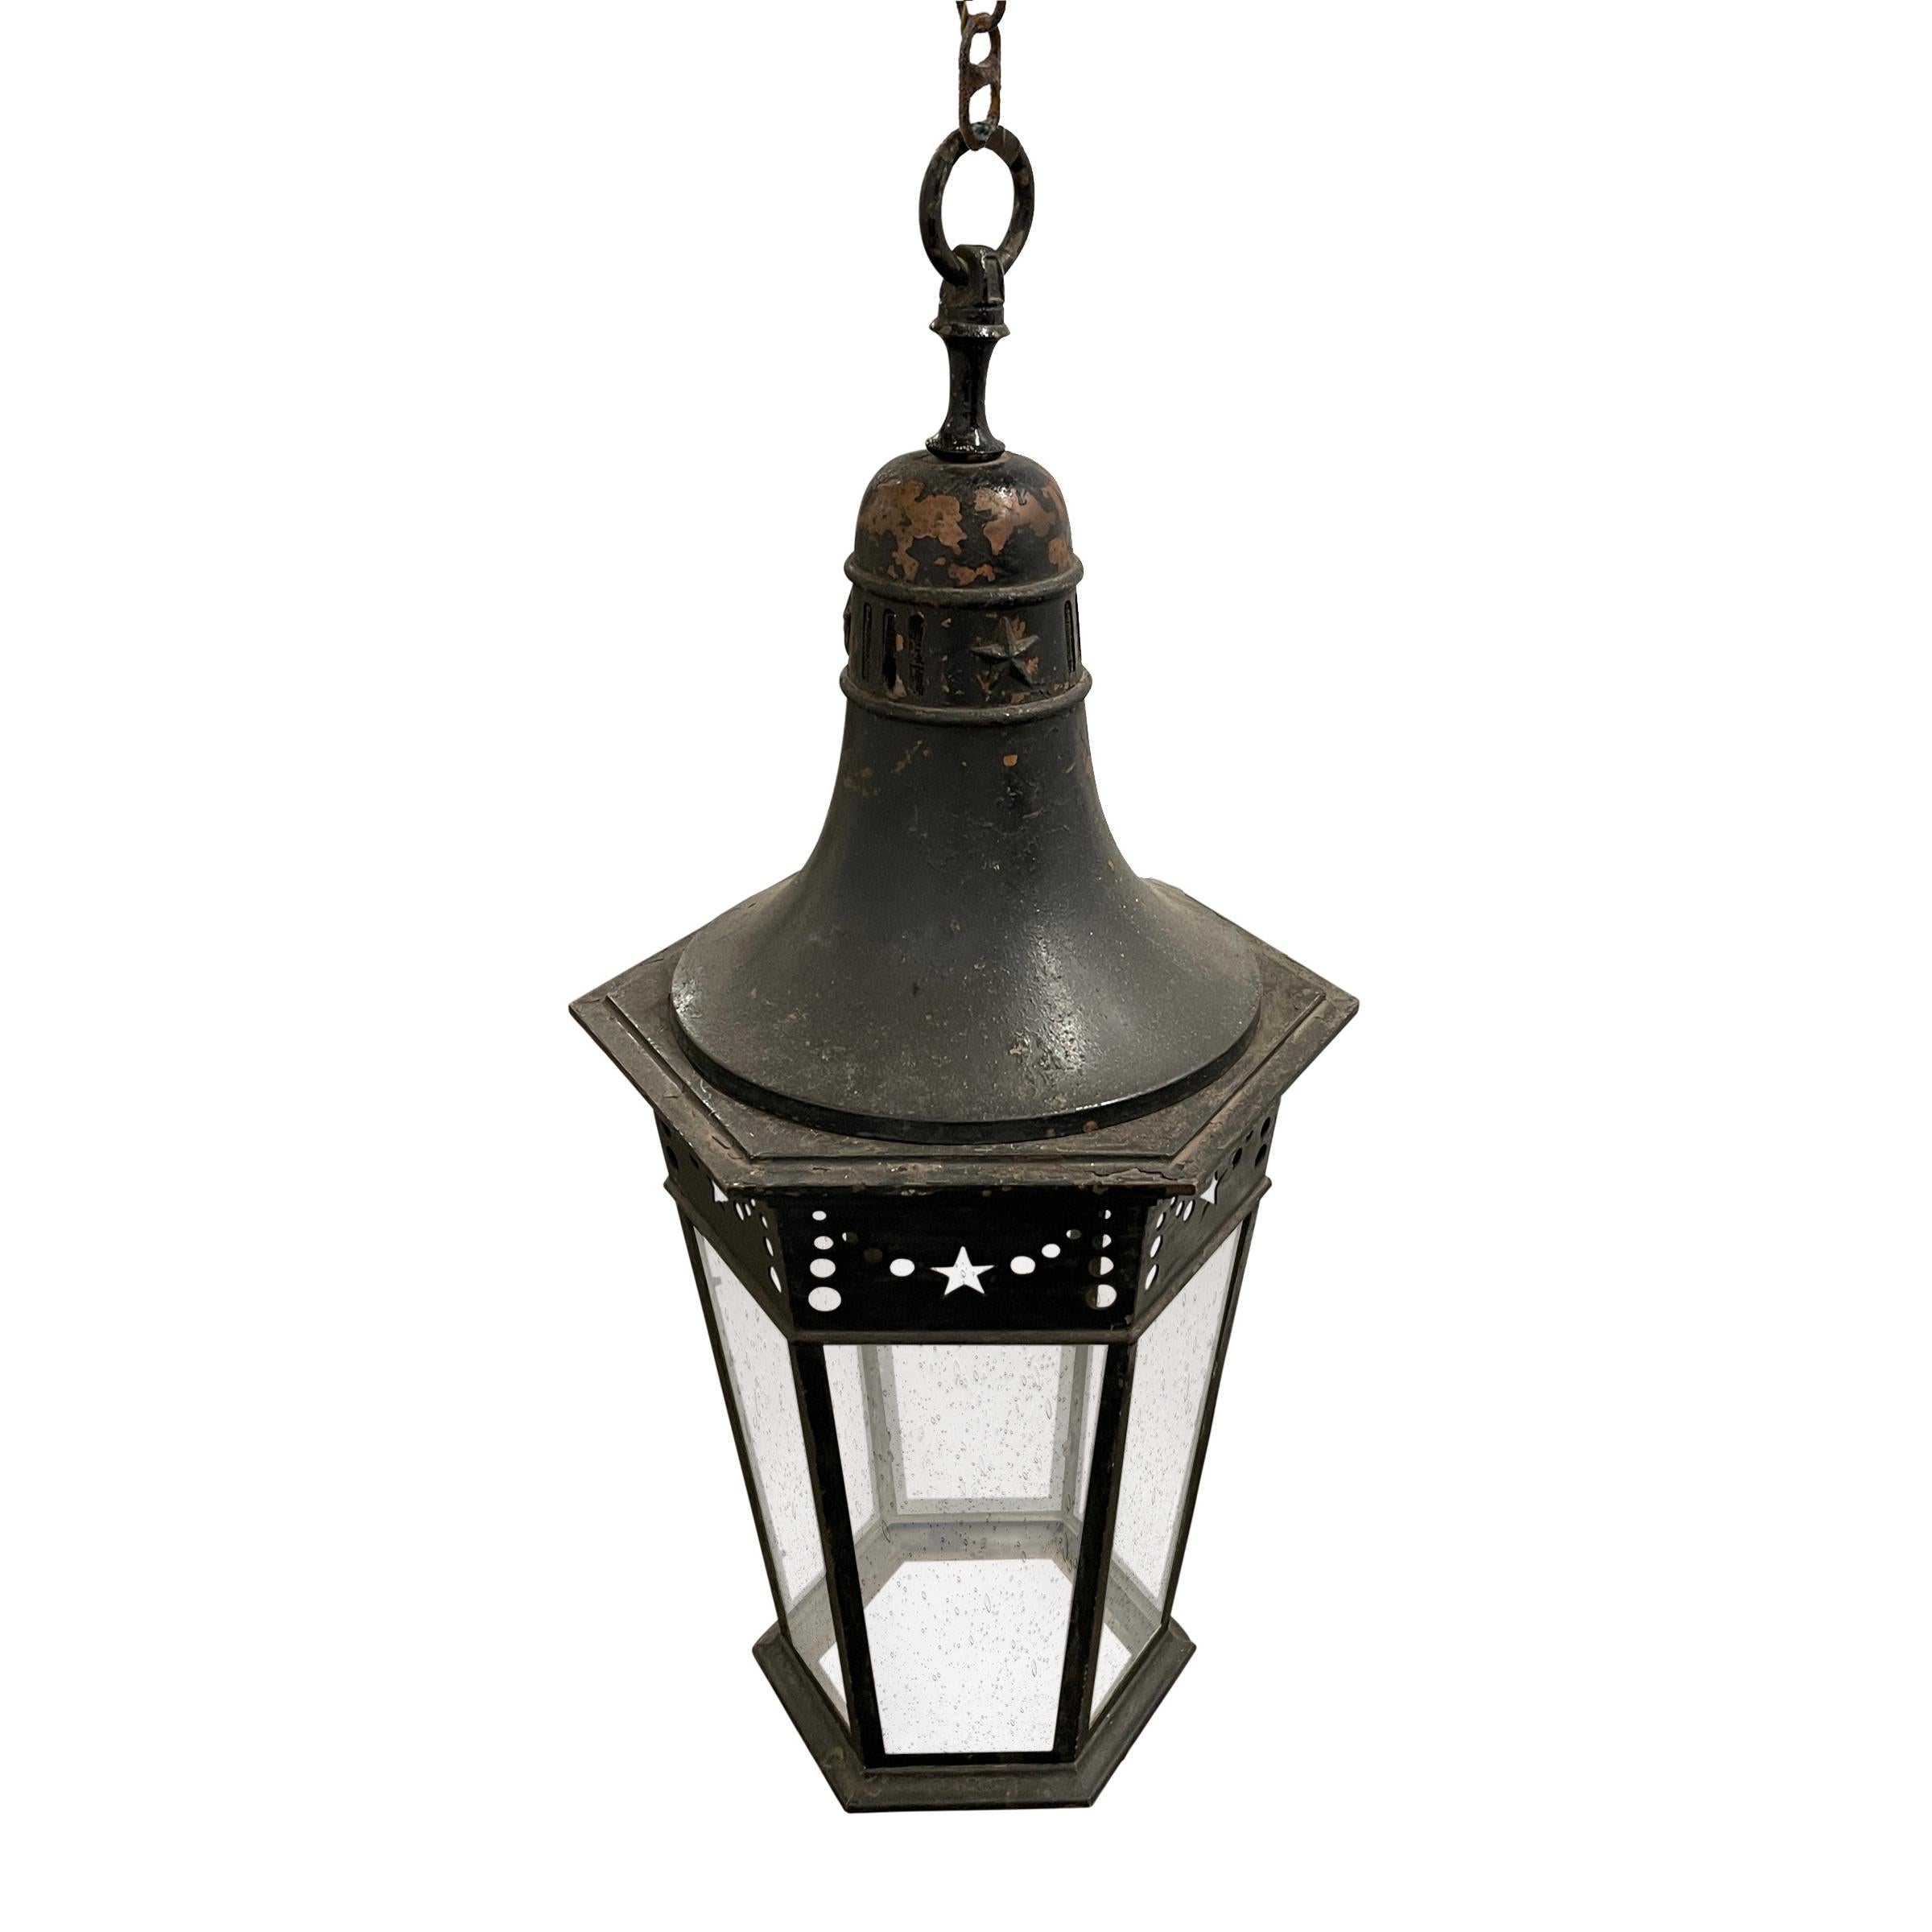 Neoclassical Revival 19th Century French Lantern